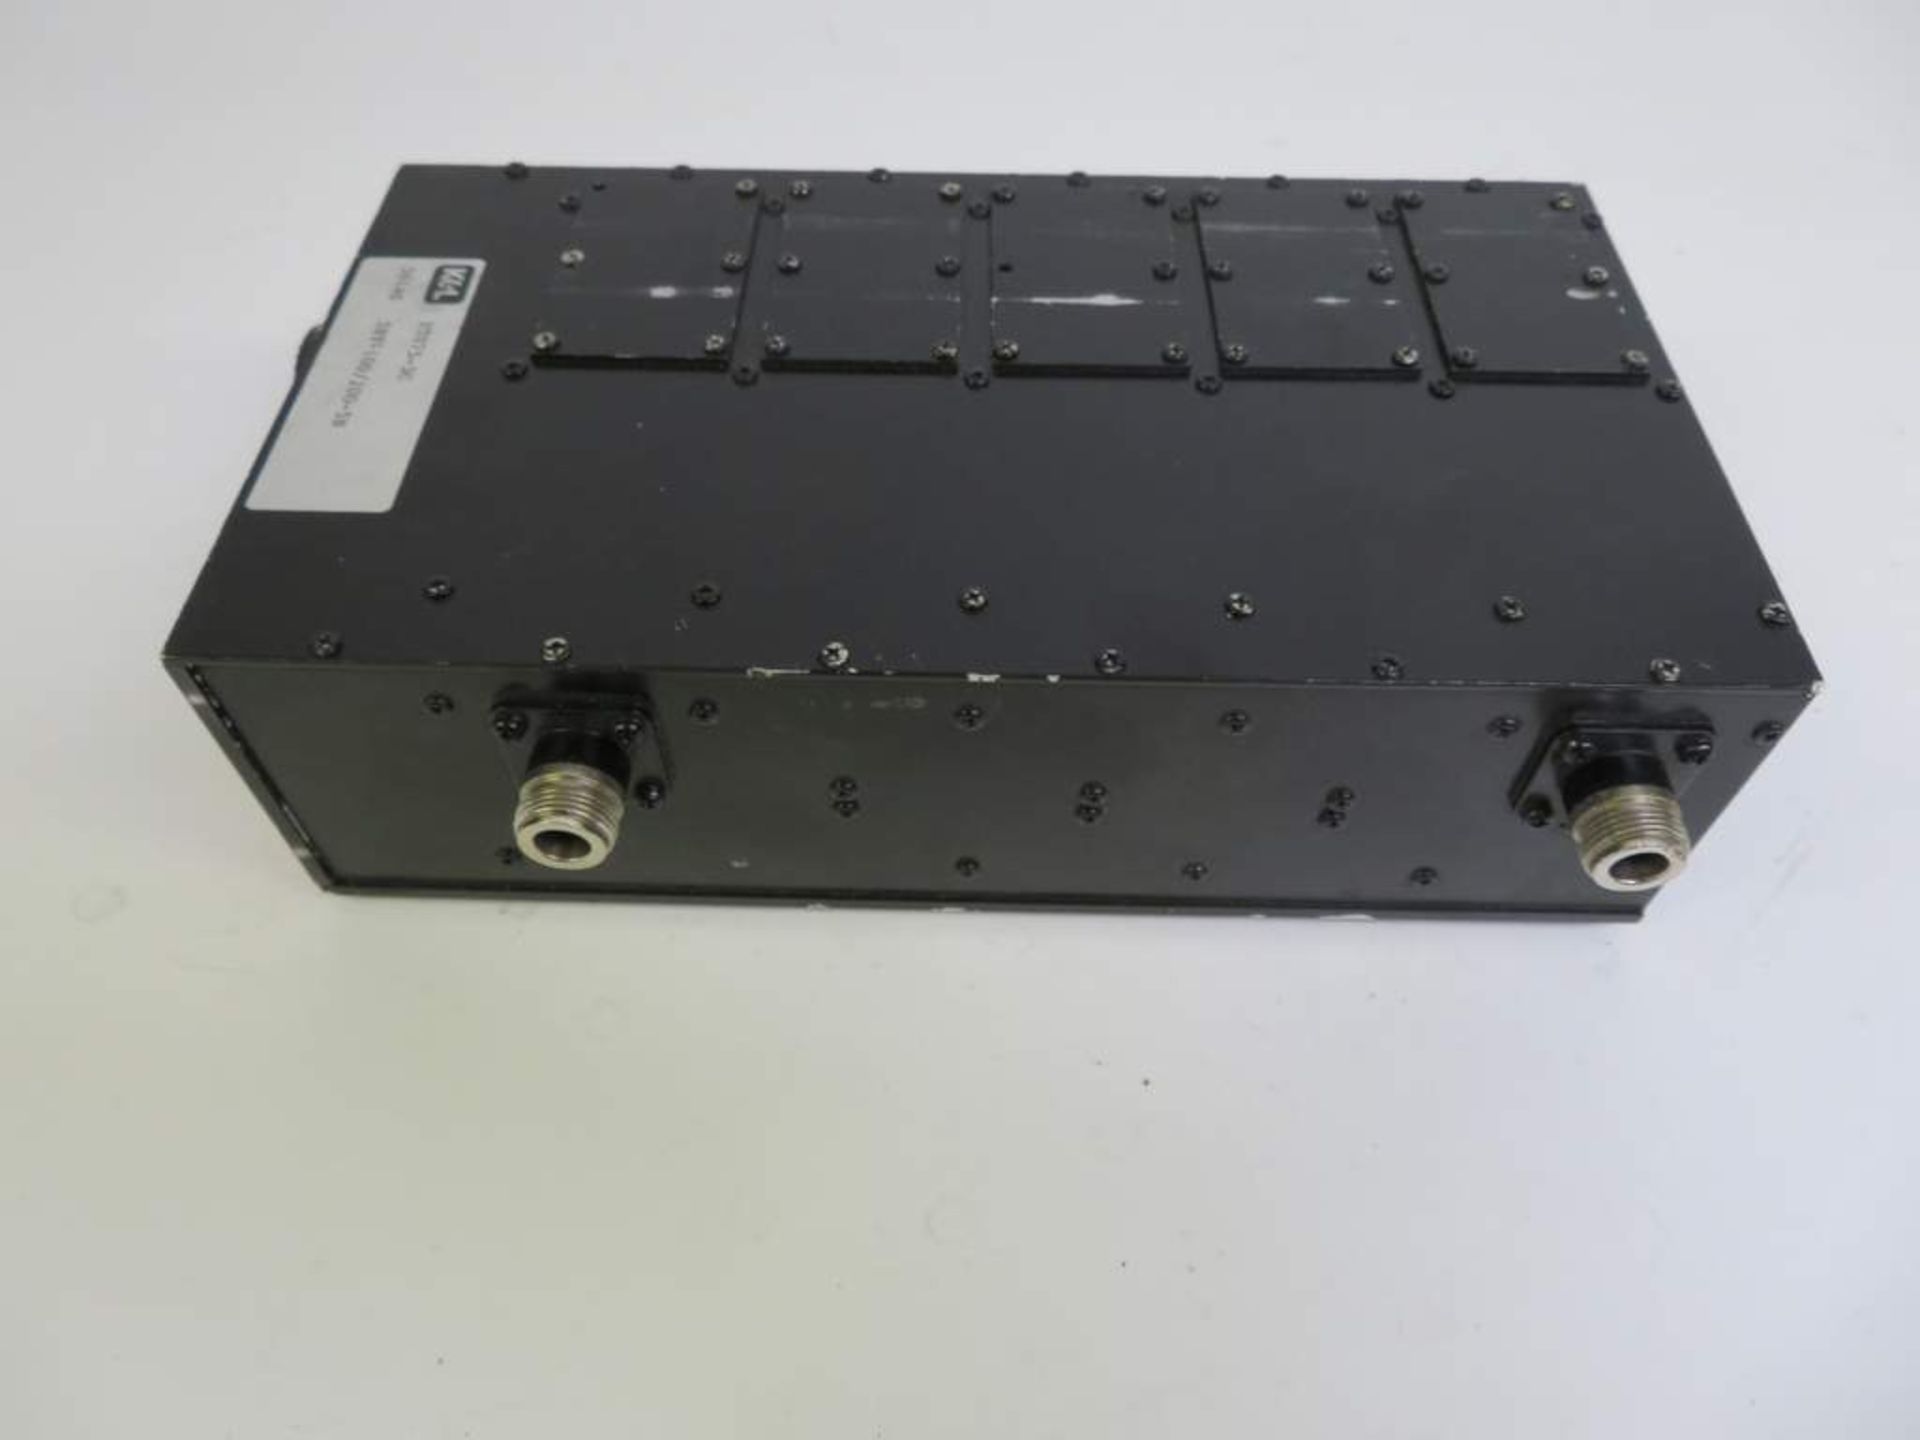 K&L 5BT-100/200-5N Tunable Bandpass Filter - Image 4 of 4